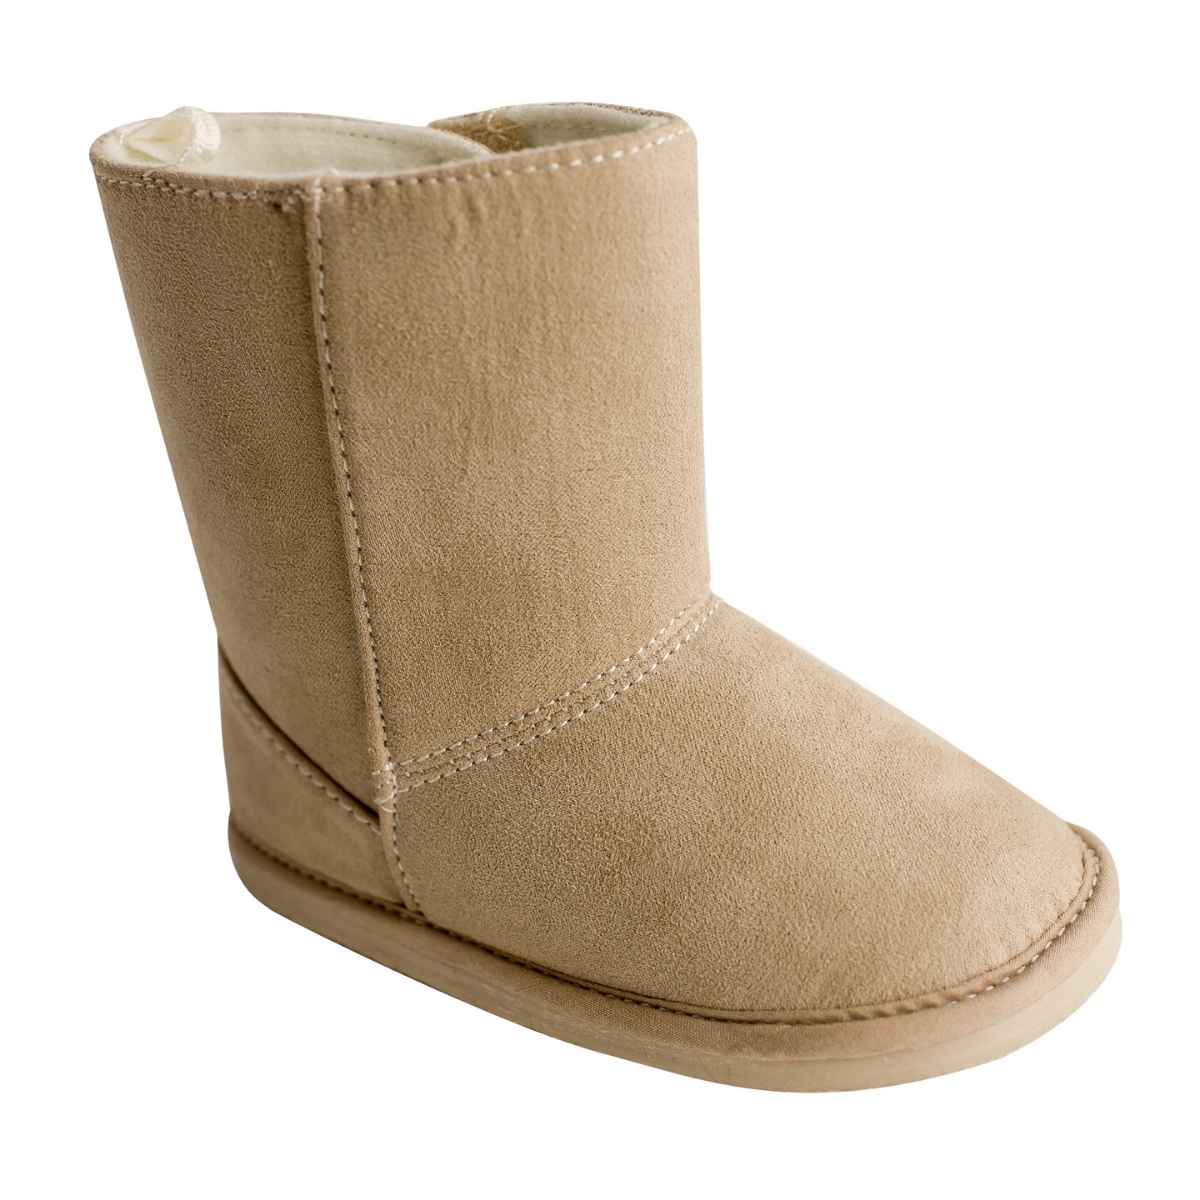 ANNABELLE Toddler Tan Faux-Suede Boots - Kids Shoe Box